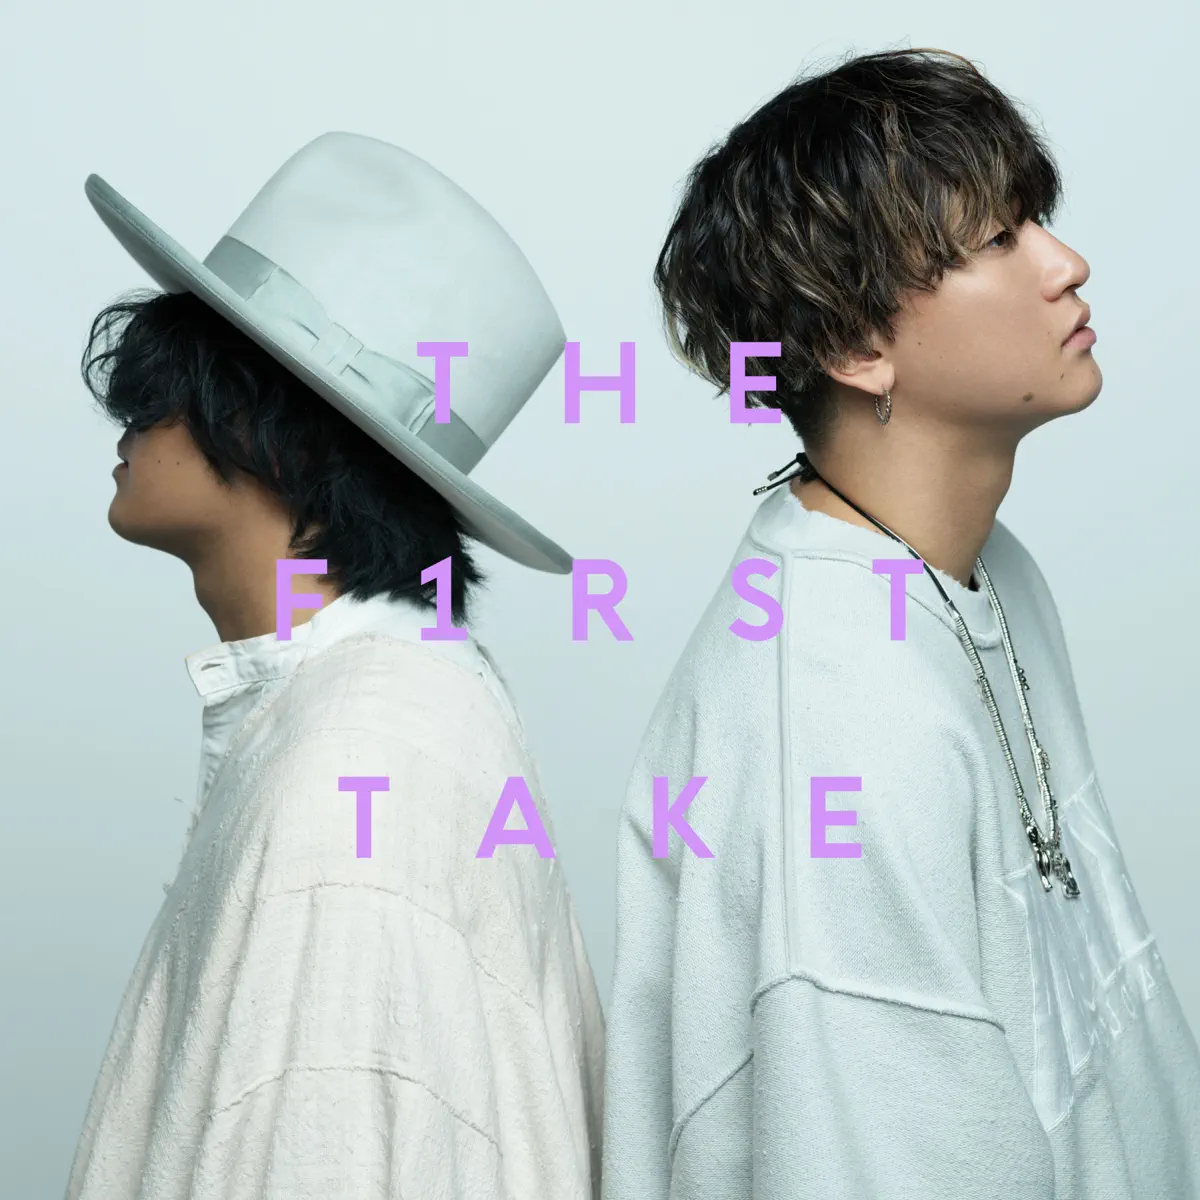 YOAKE - ねぇ - From THE FIRST TAKE (feat. Rin音) - Single (2023) [iTunes Plus AAC M4A]-新房子